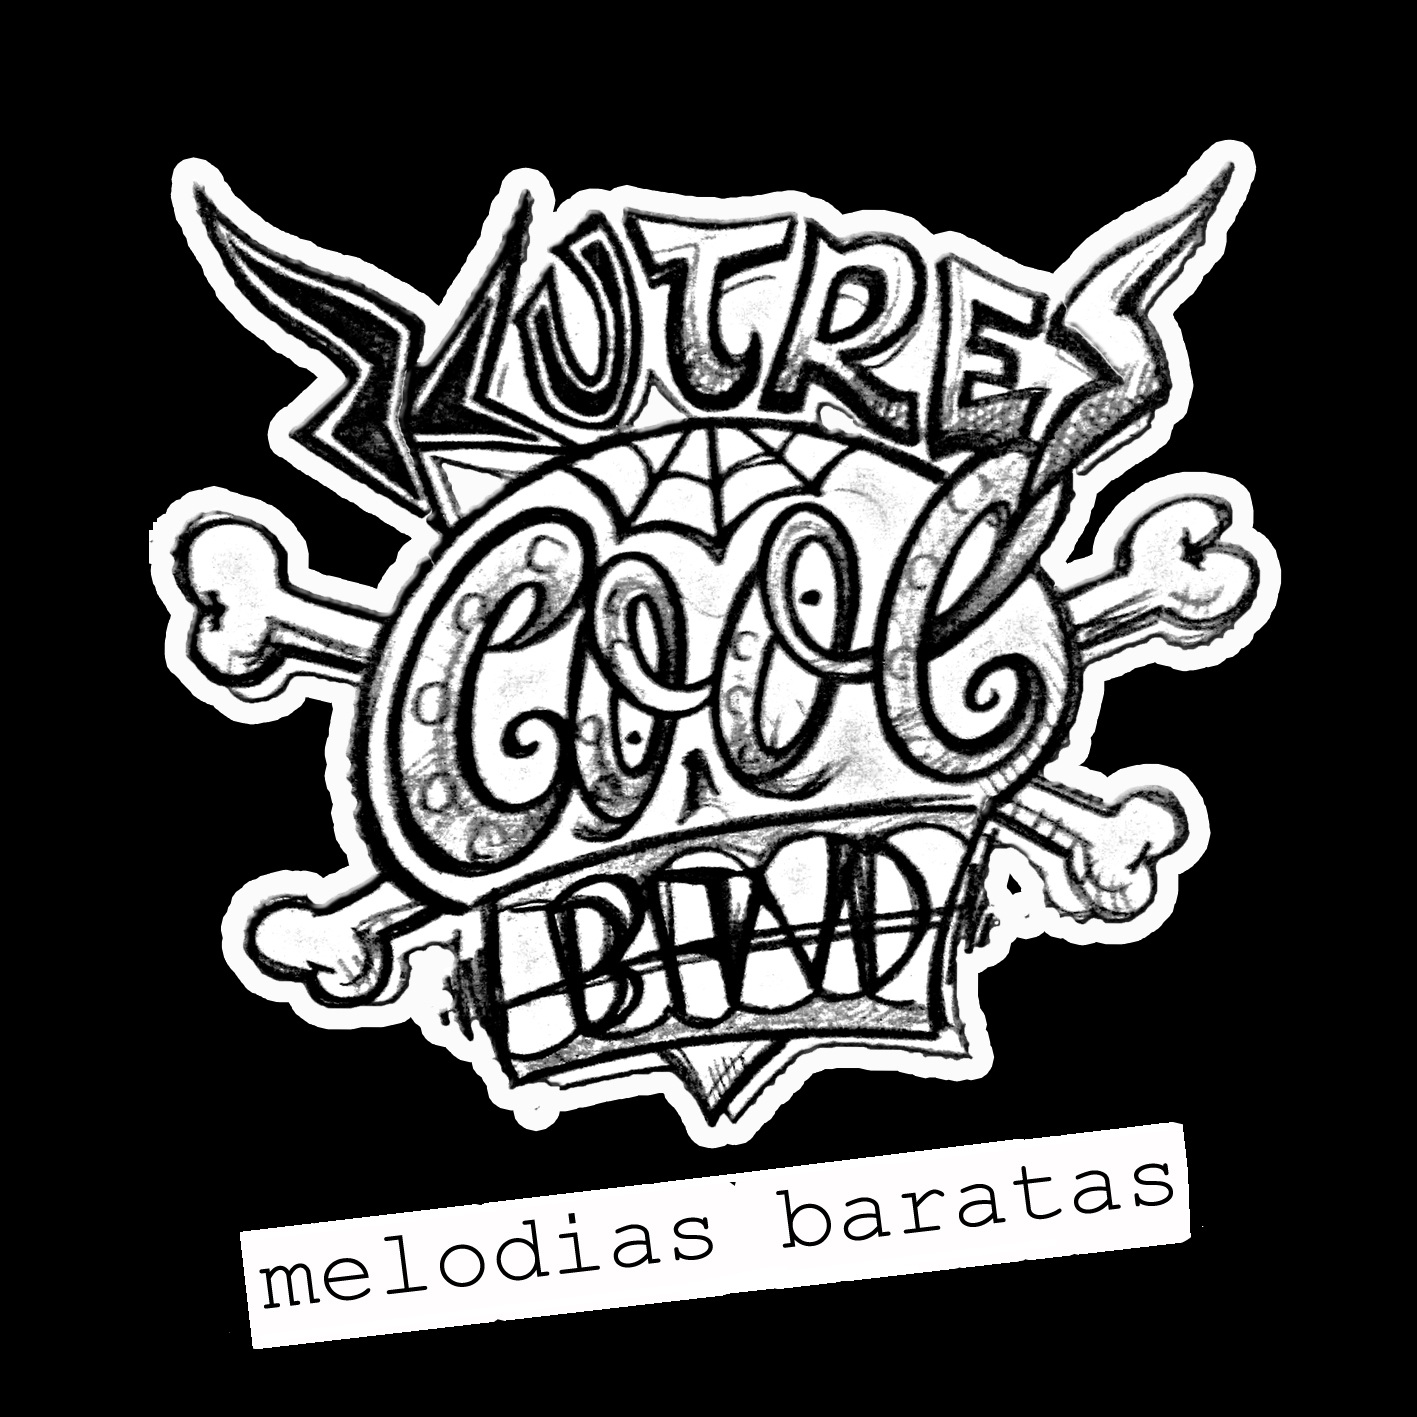 kutres cool band frontal